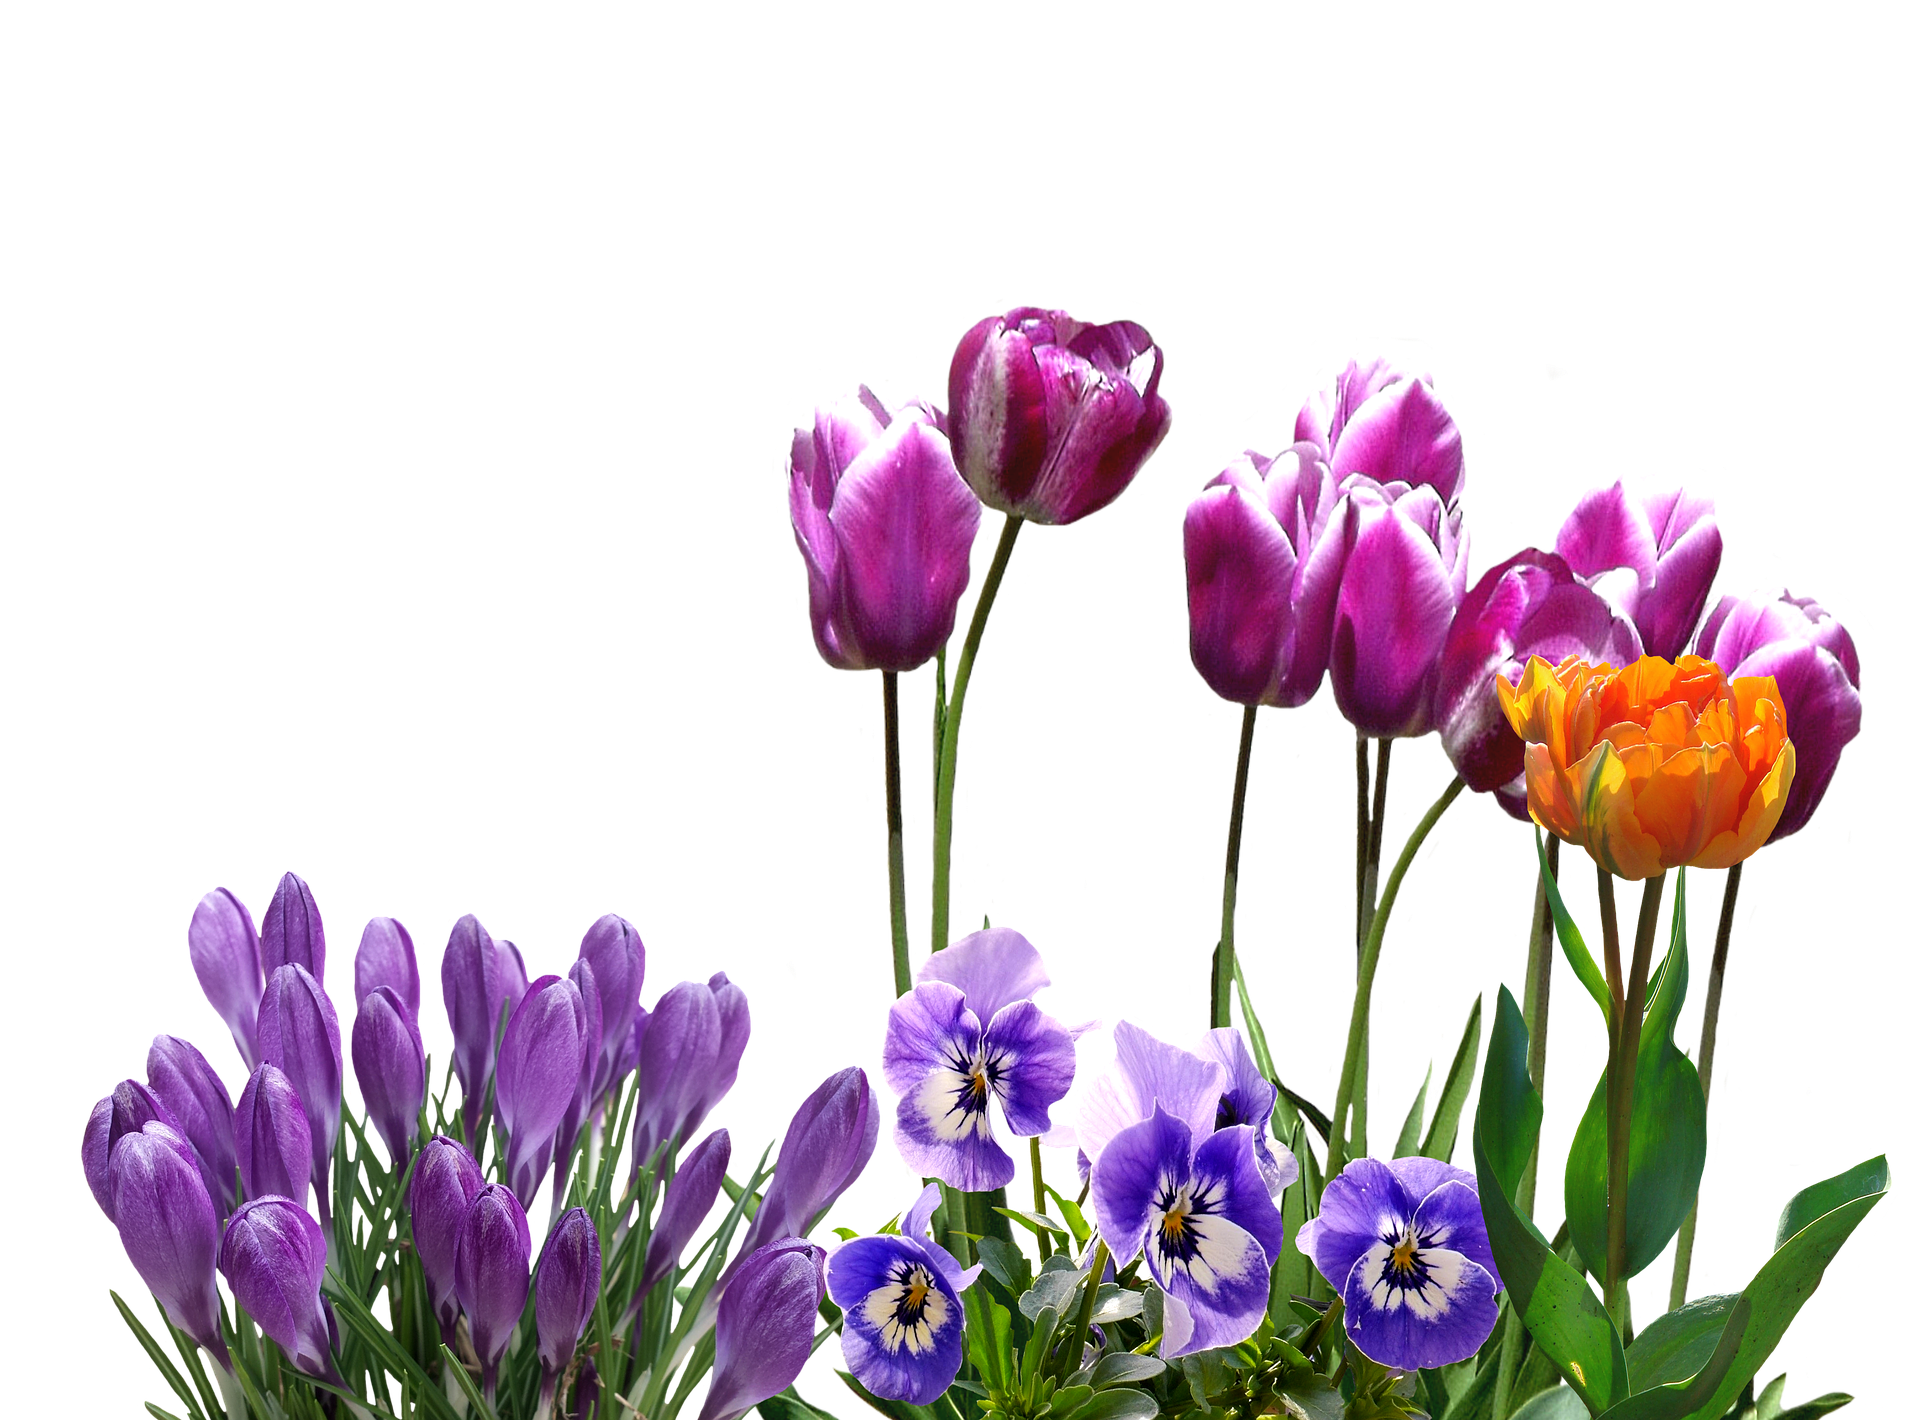 A Group Of Flowers On A Black Background